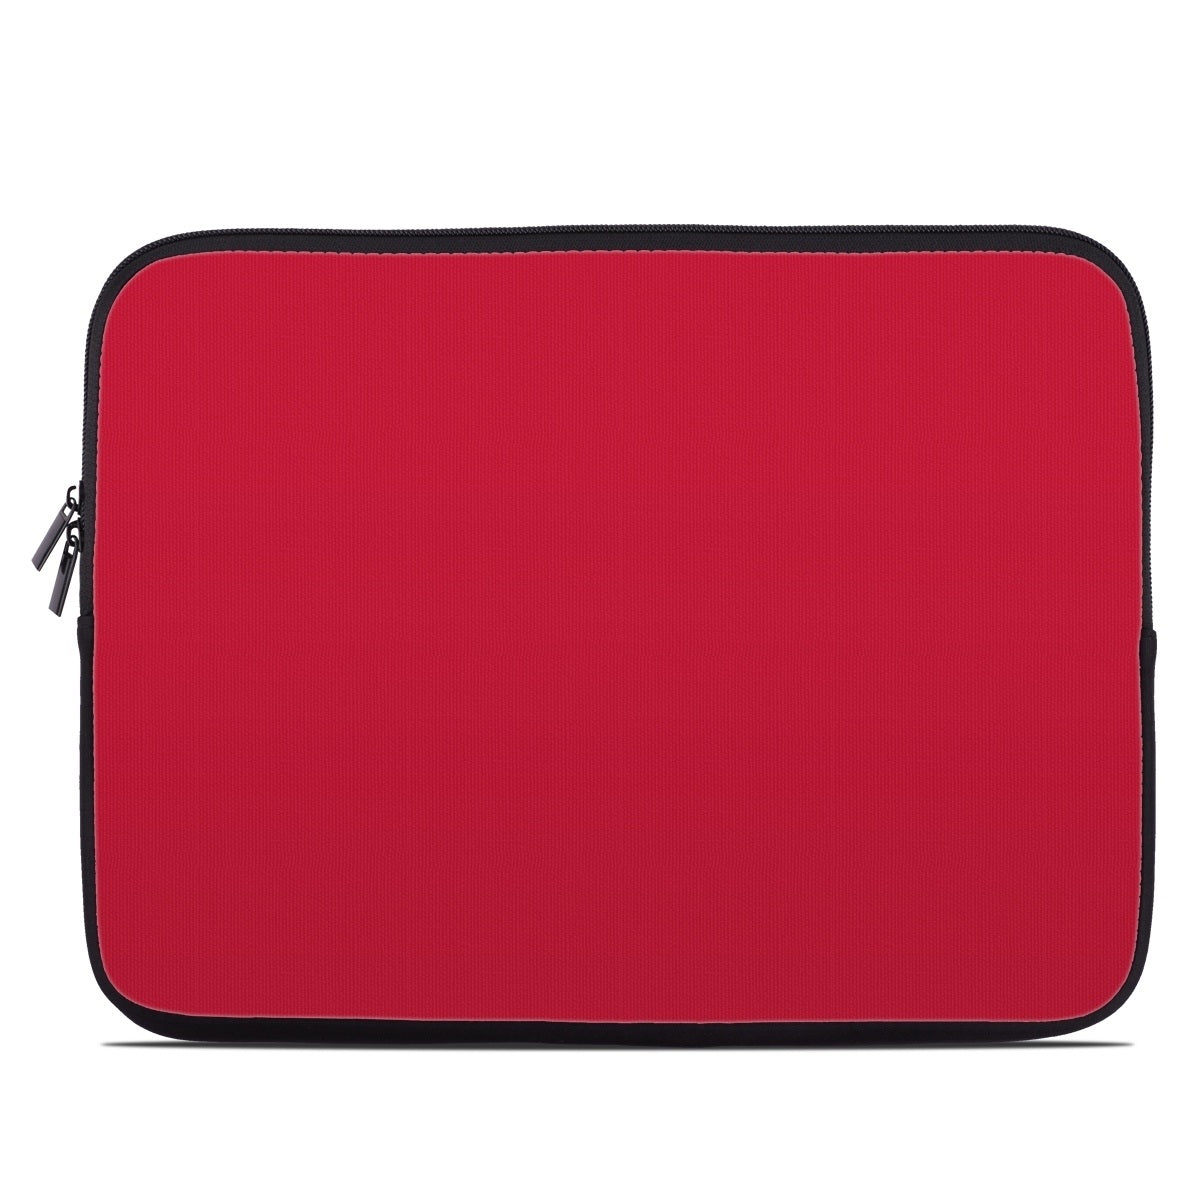 Solid State Red - Laptop Sleeve